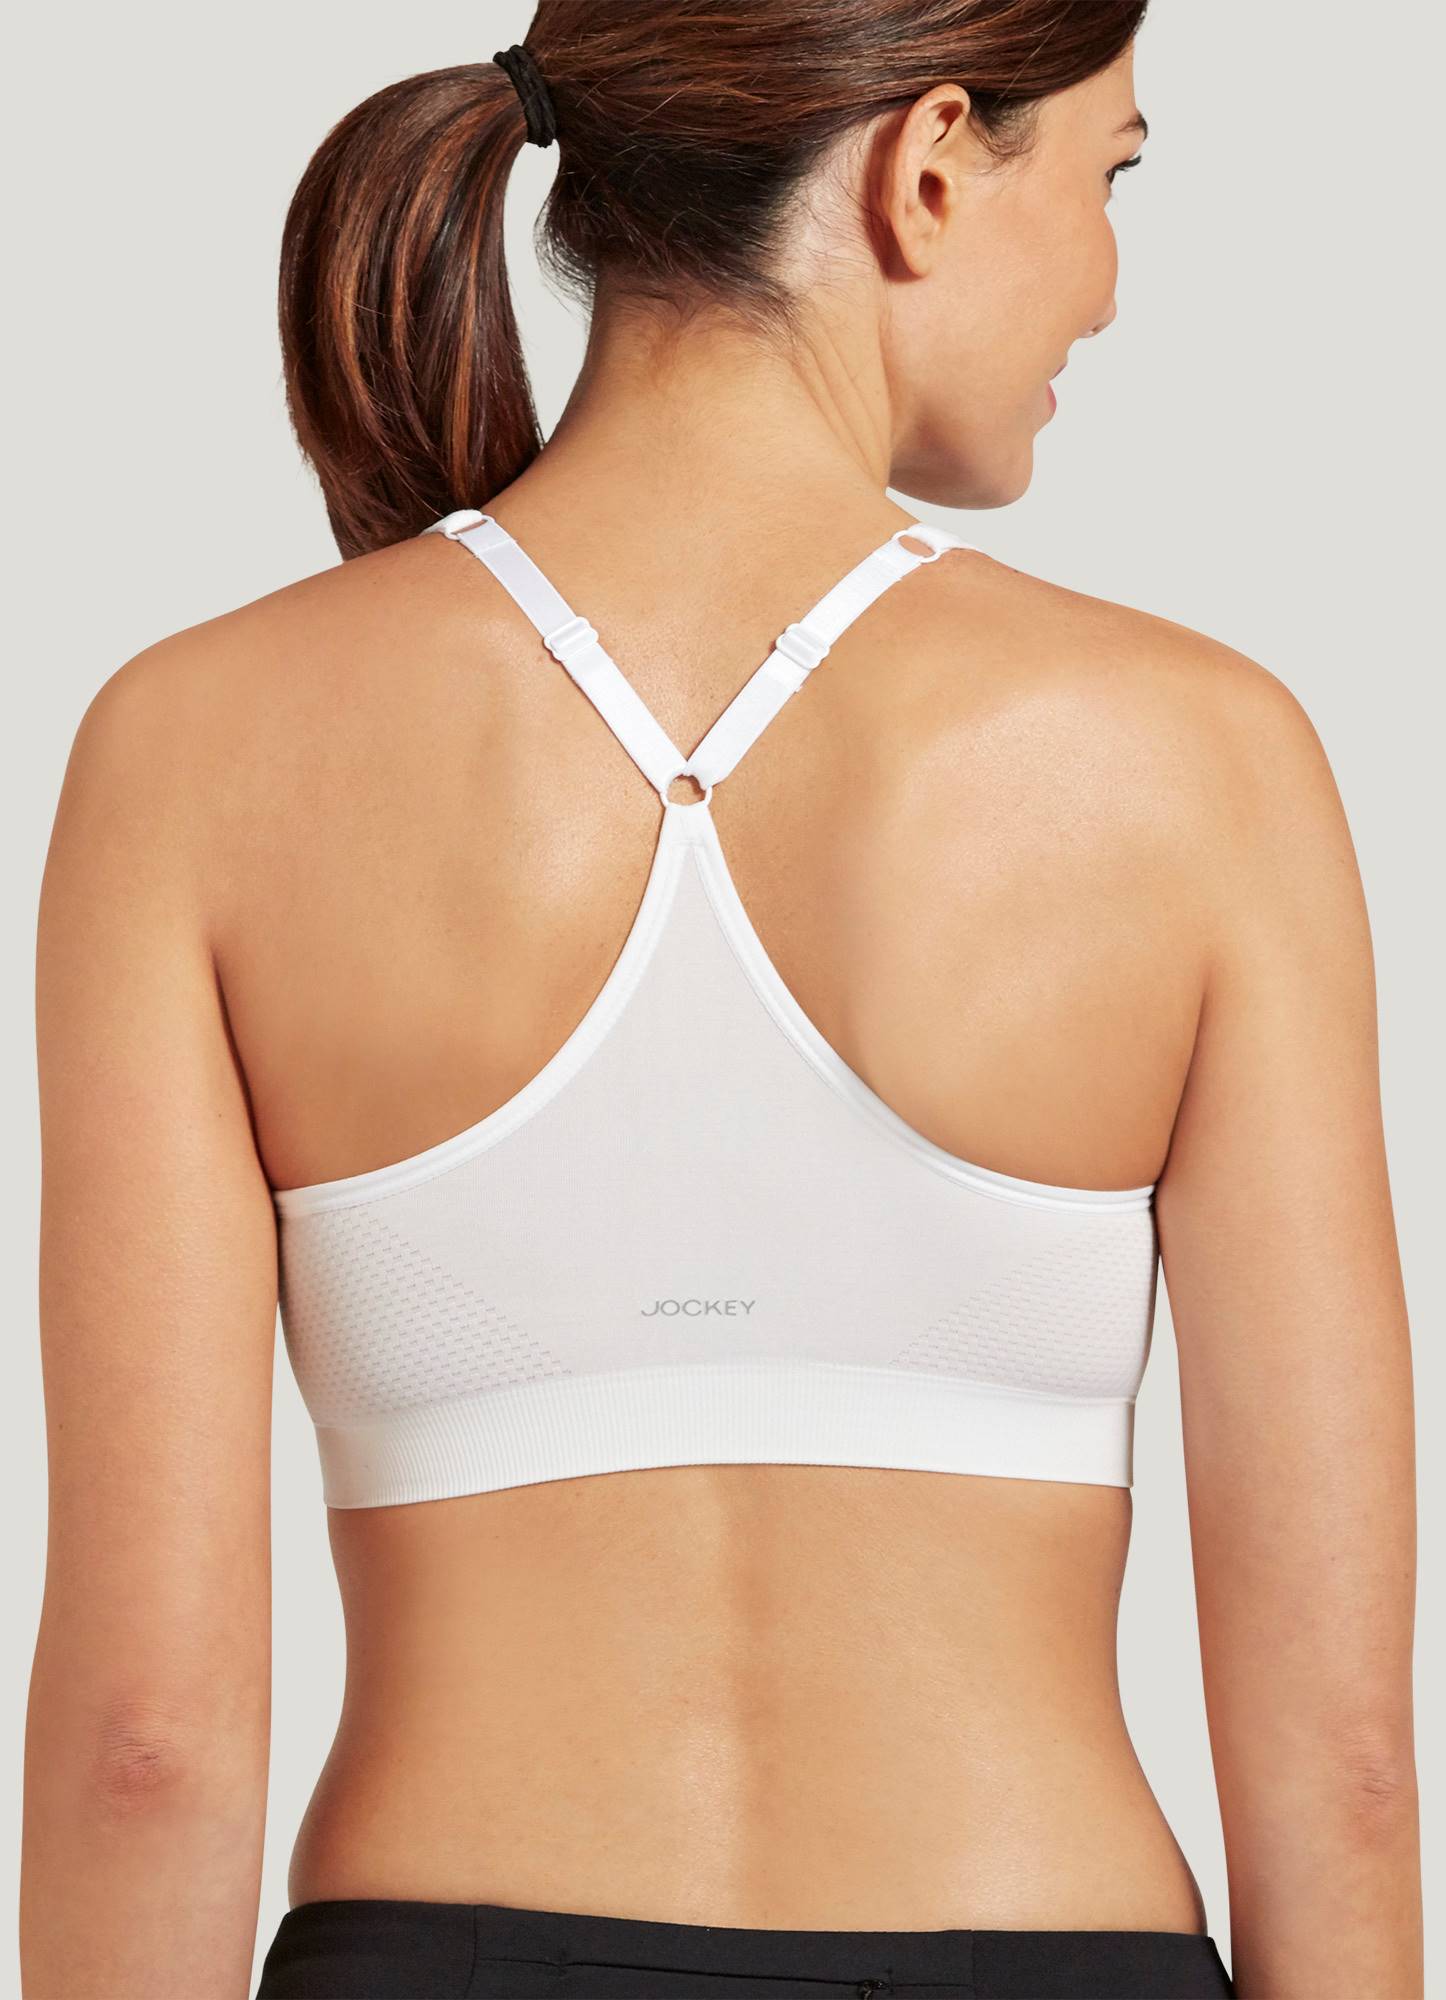 Middle Hole All Cotton Medium Cup Sports Bra 100 Pieces